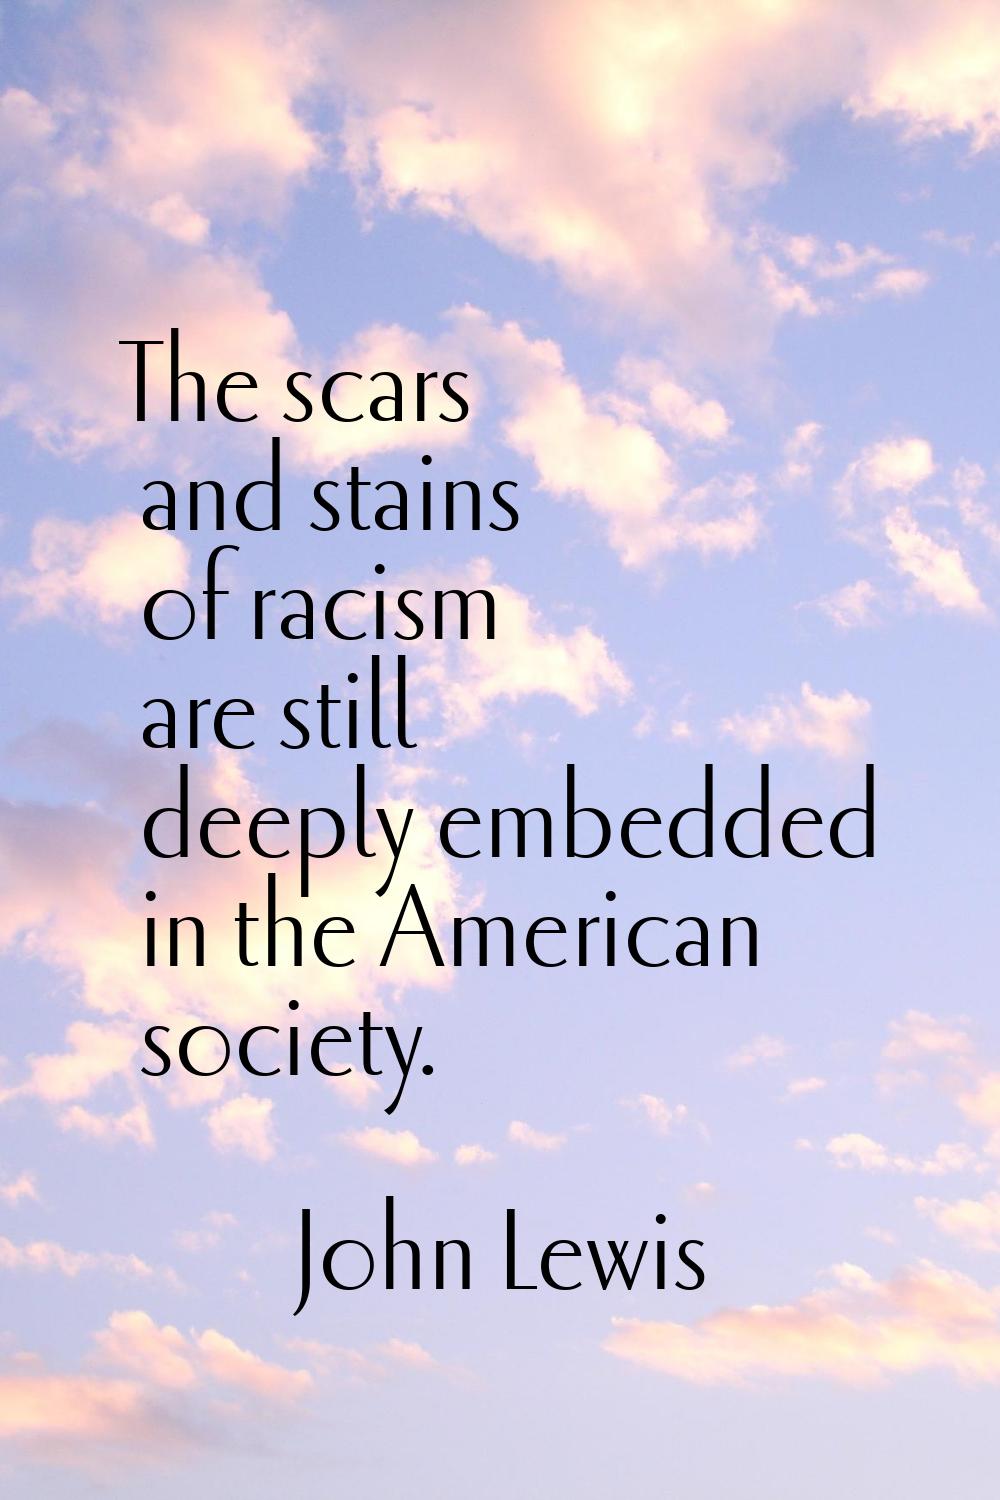 The scars and stains of racism are still deeply embedded in the American society.